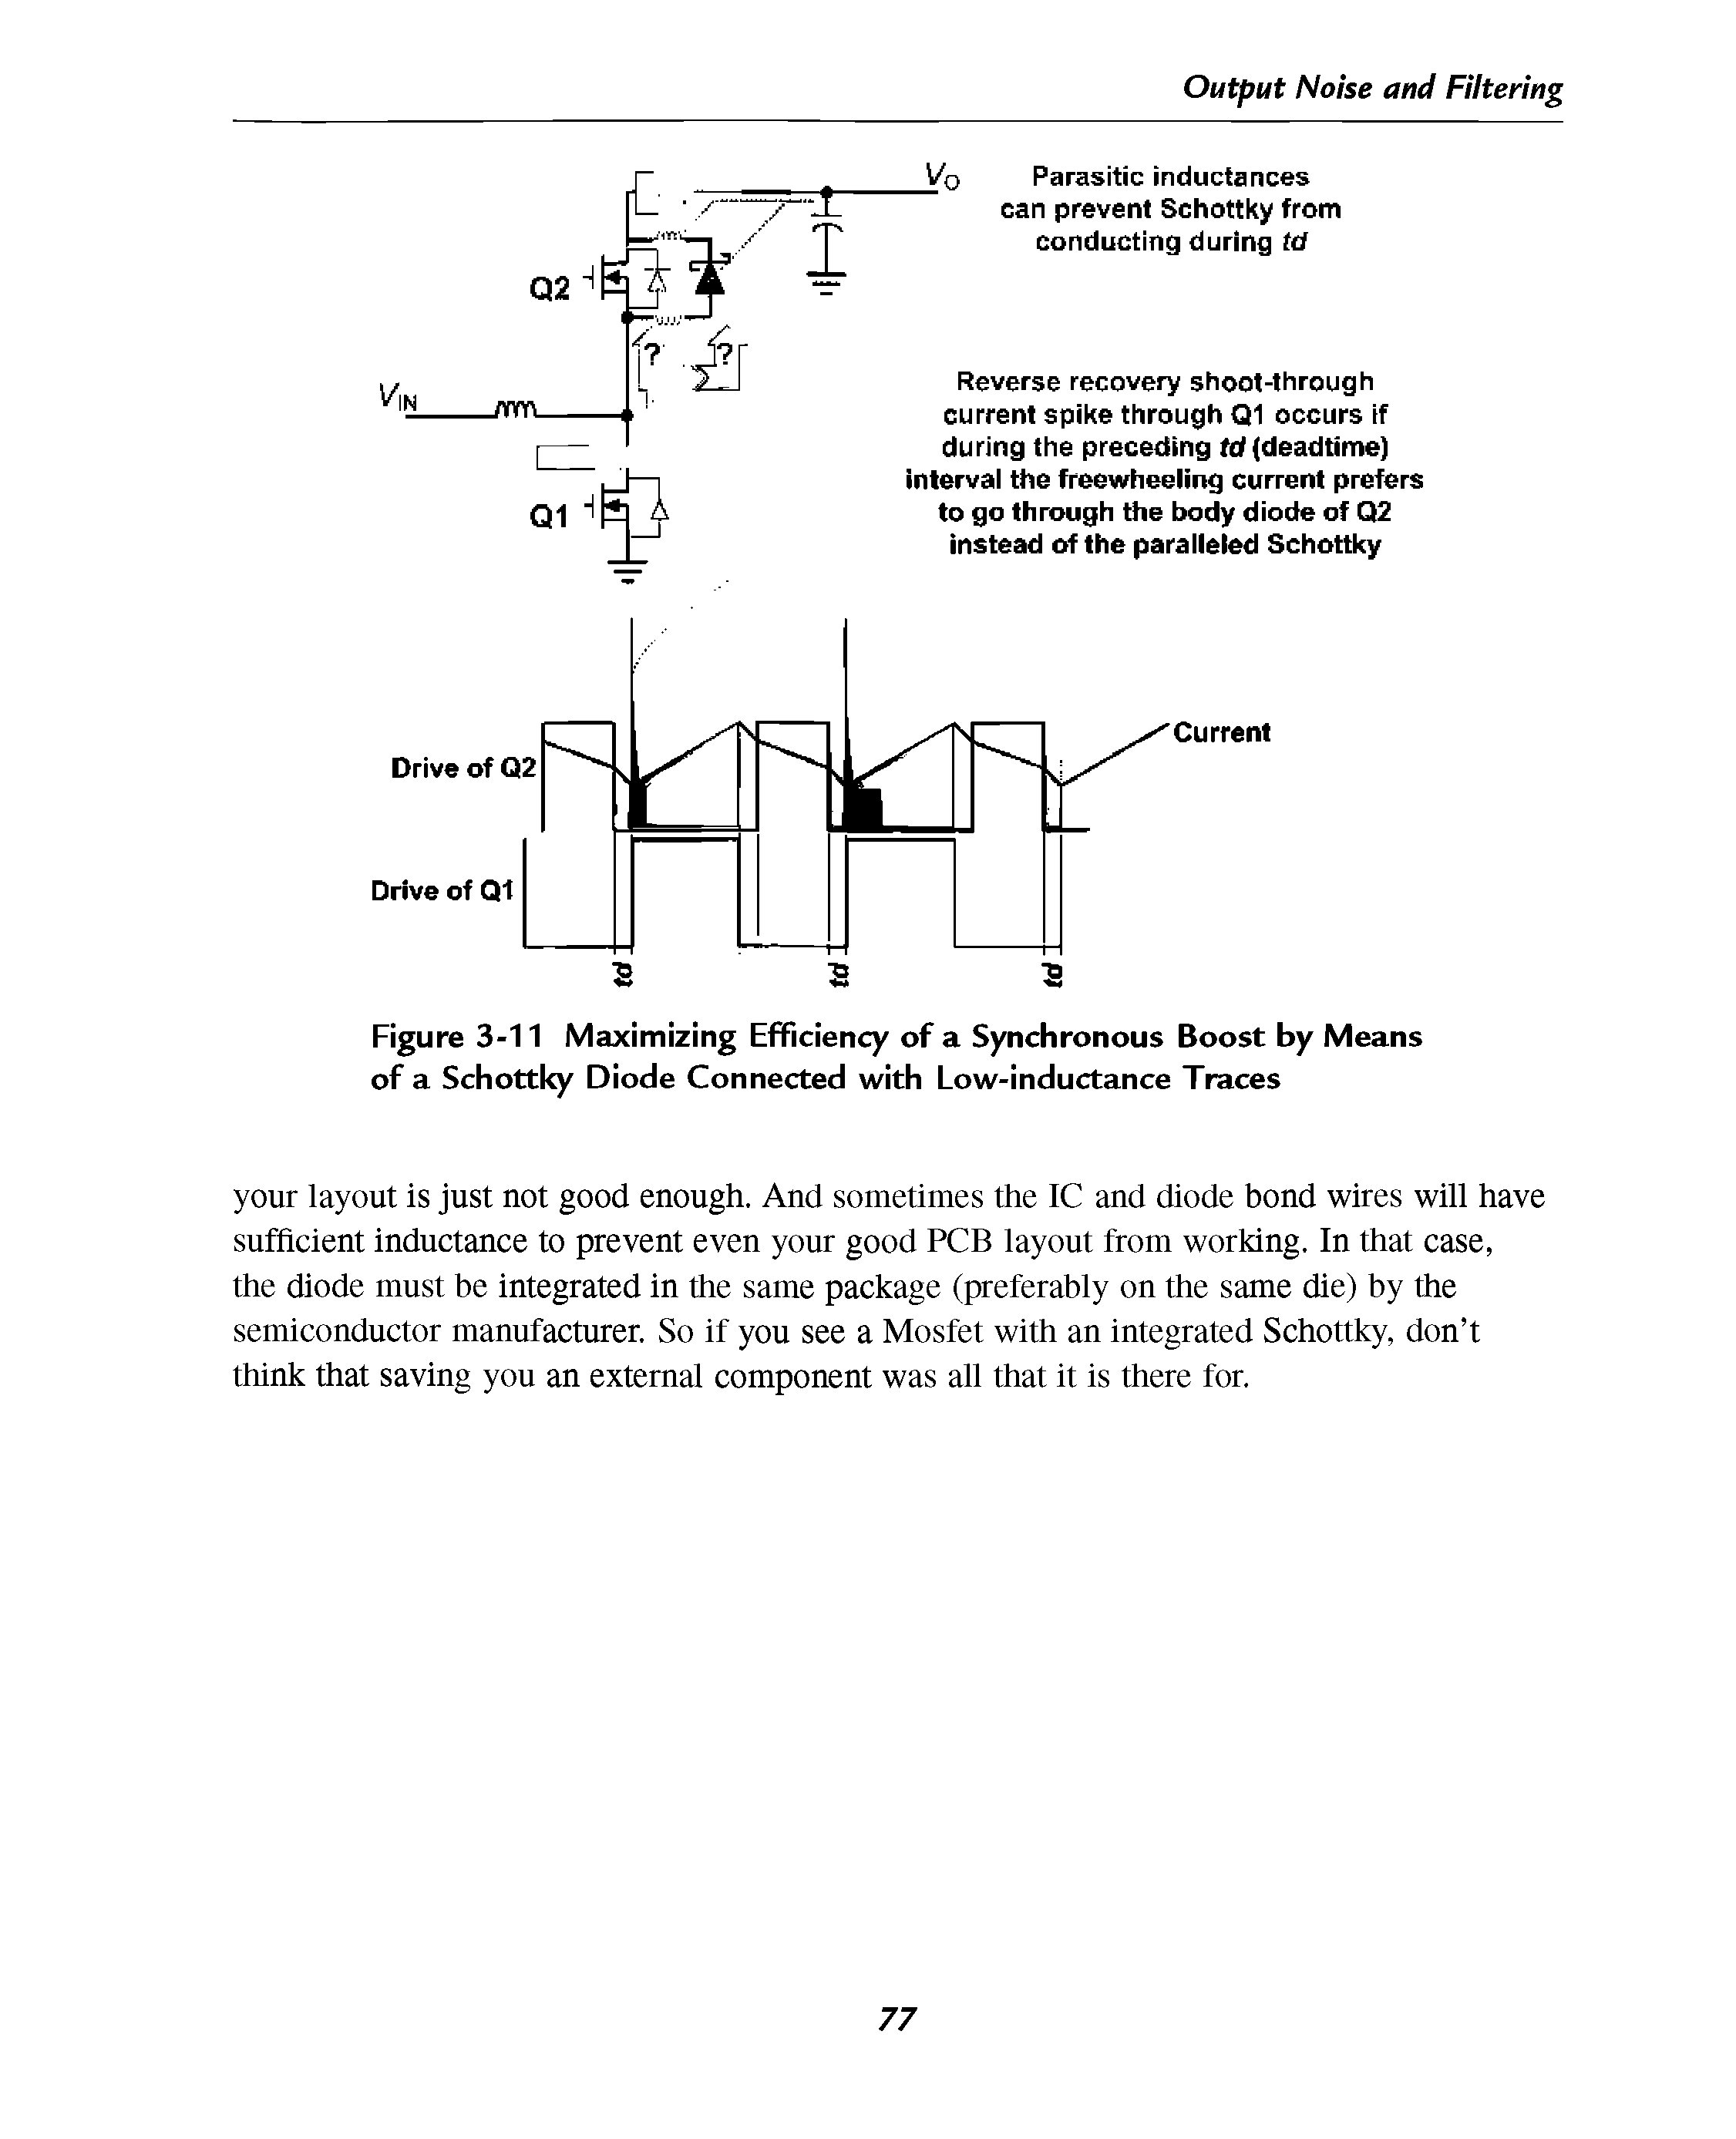 Figure 3-11 Maximizing Efficiency of a Synchronous Boost by Means of a Schottky Diode Connected with Low-inductance Traces...